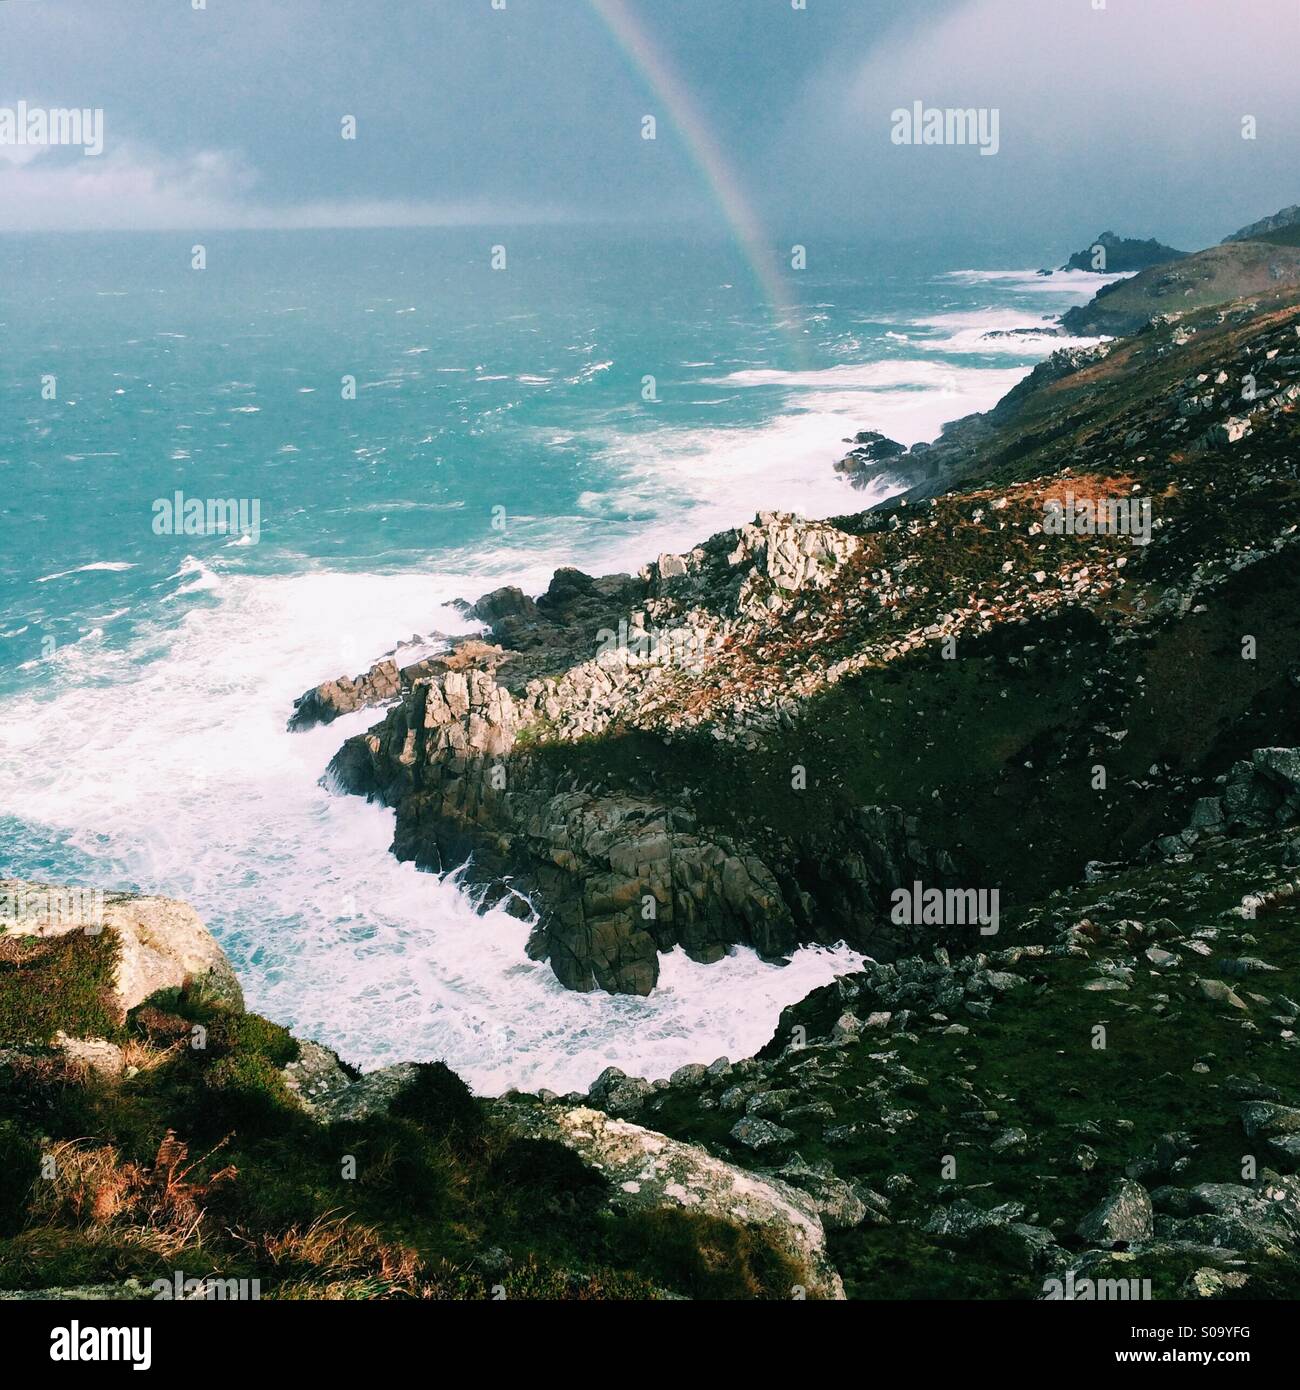 Storm surf and rocky cliffs on the coast Stock Photo